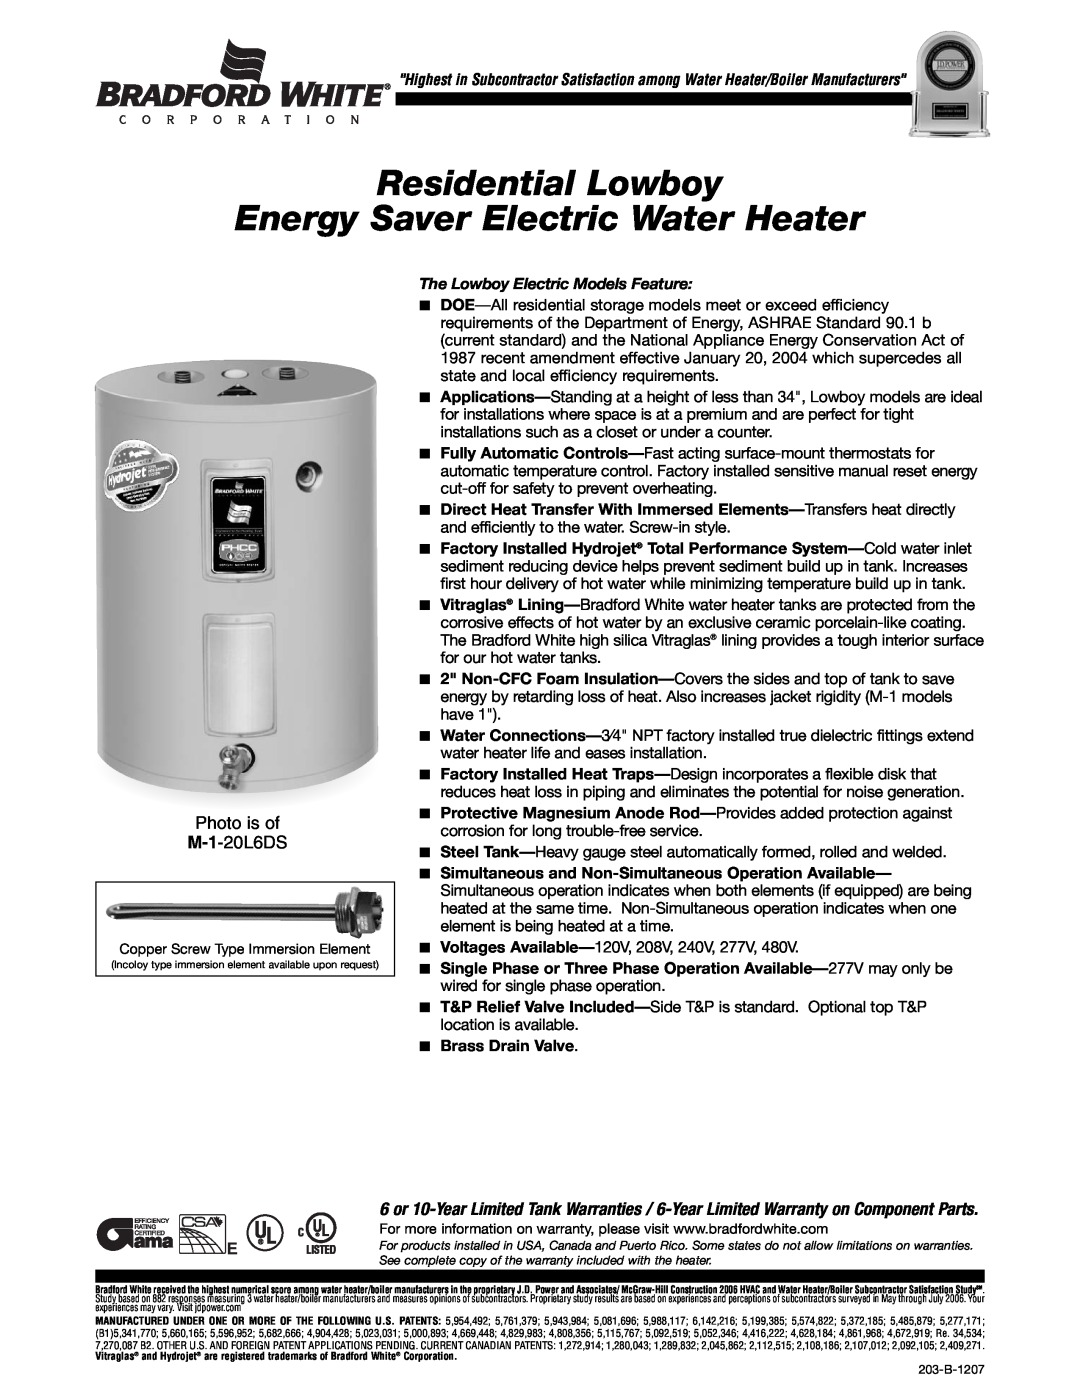 Bradford-White Corp 203-B warranty Residential Lowboy Energy Saver Electric Water Heater, Photo is of M-1-20L6DS 